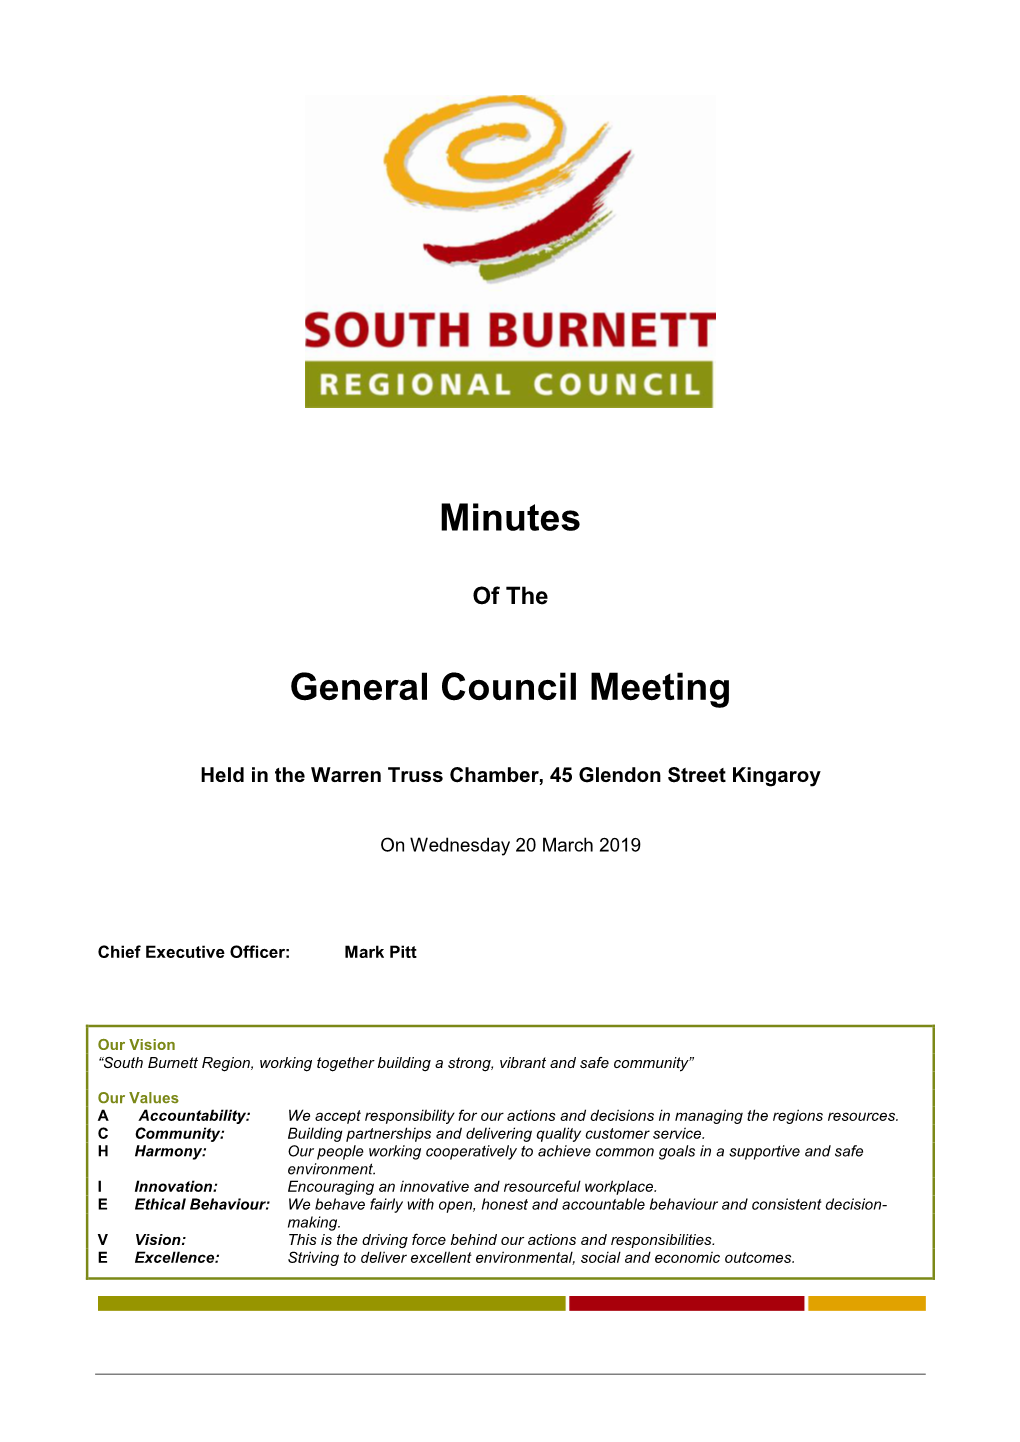 South Burnett Regional Council General Meeting – Minutes - Wednesday 20 March 2019